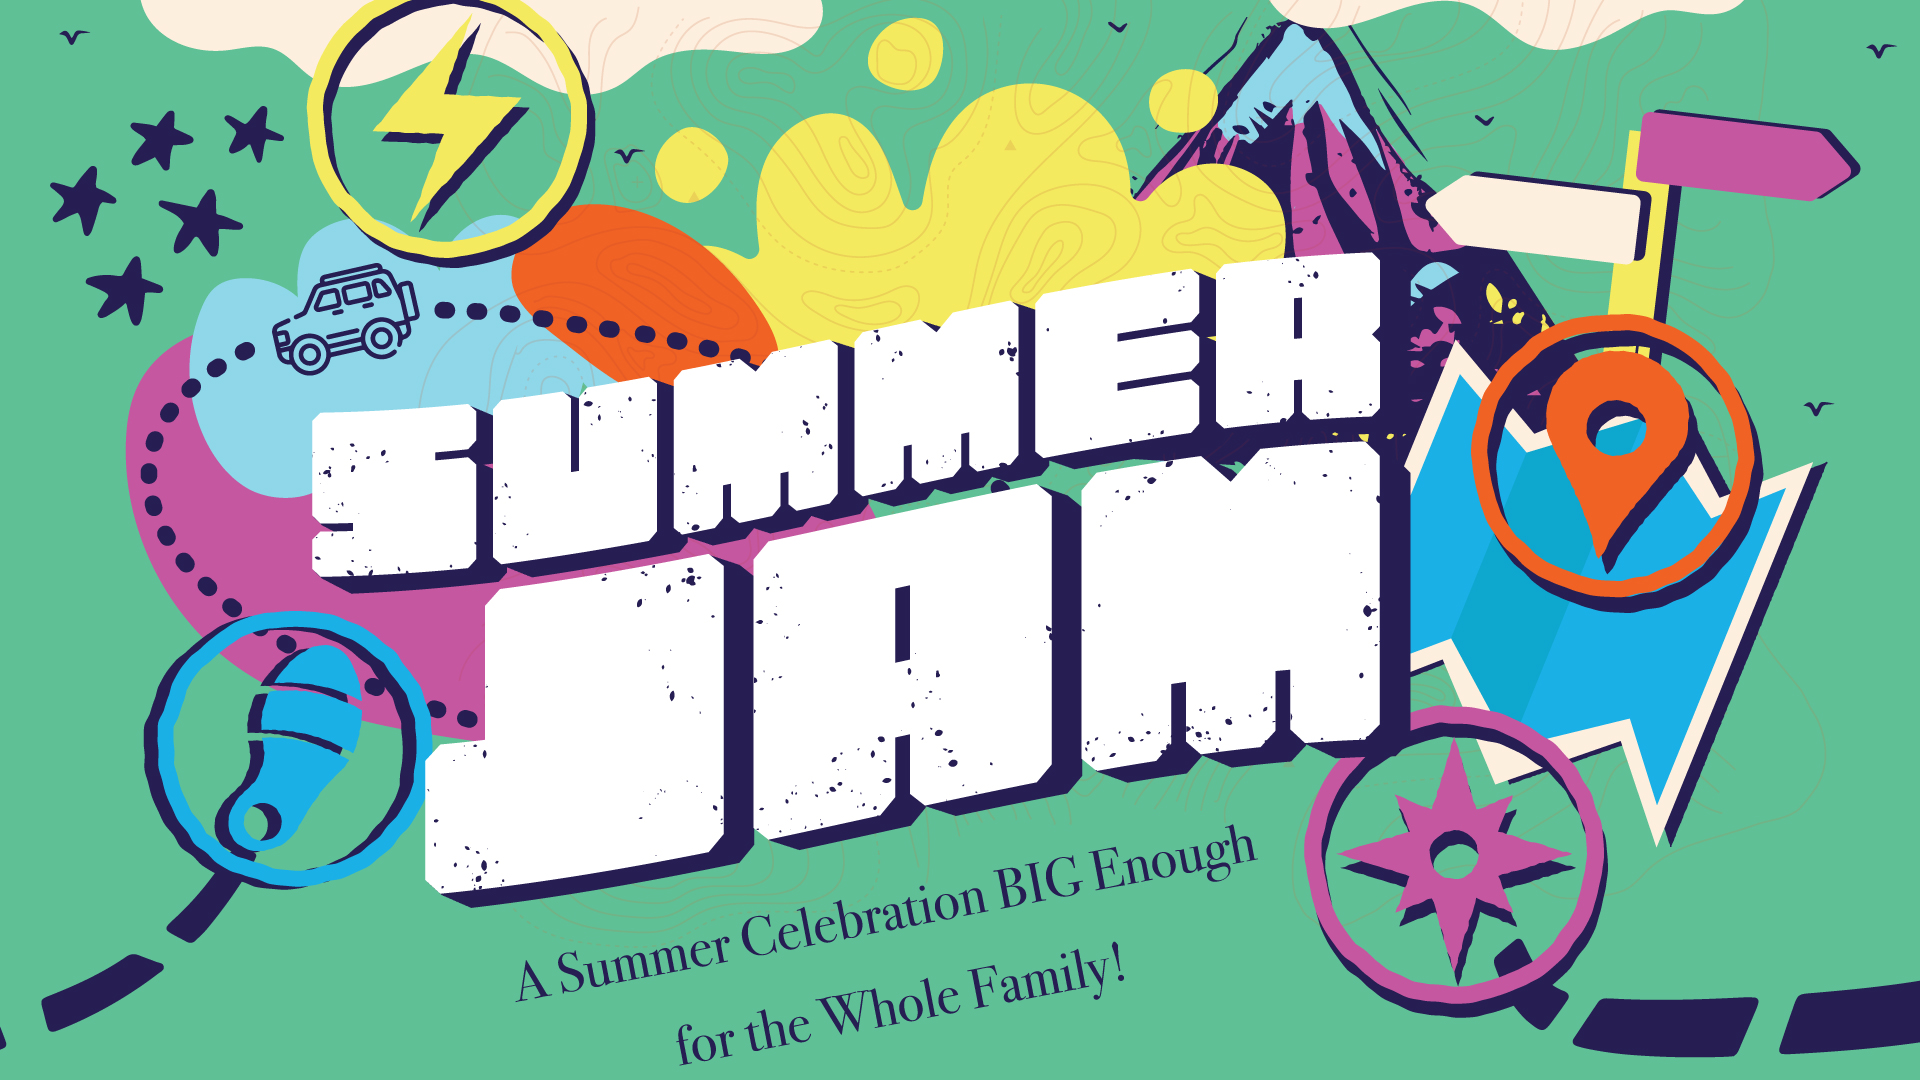 Summer Jam

A great way to kick off summer! For families with kids in mind.
